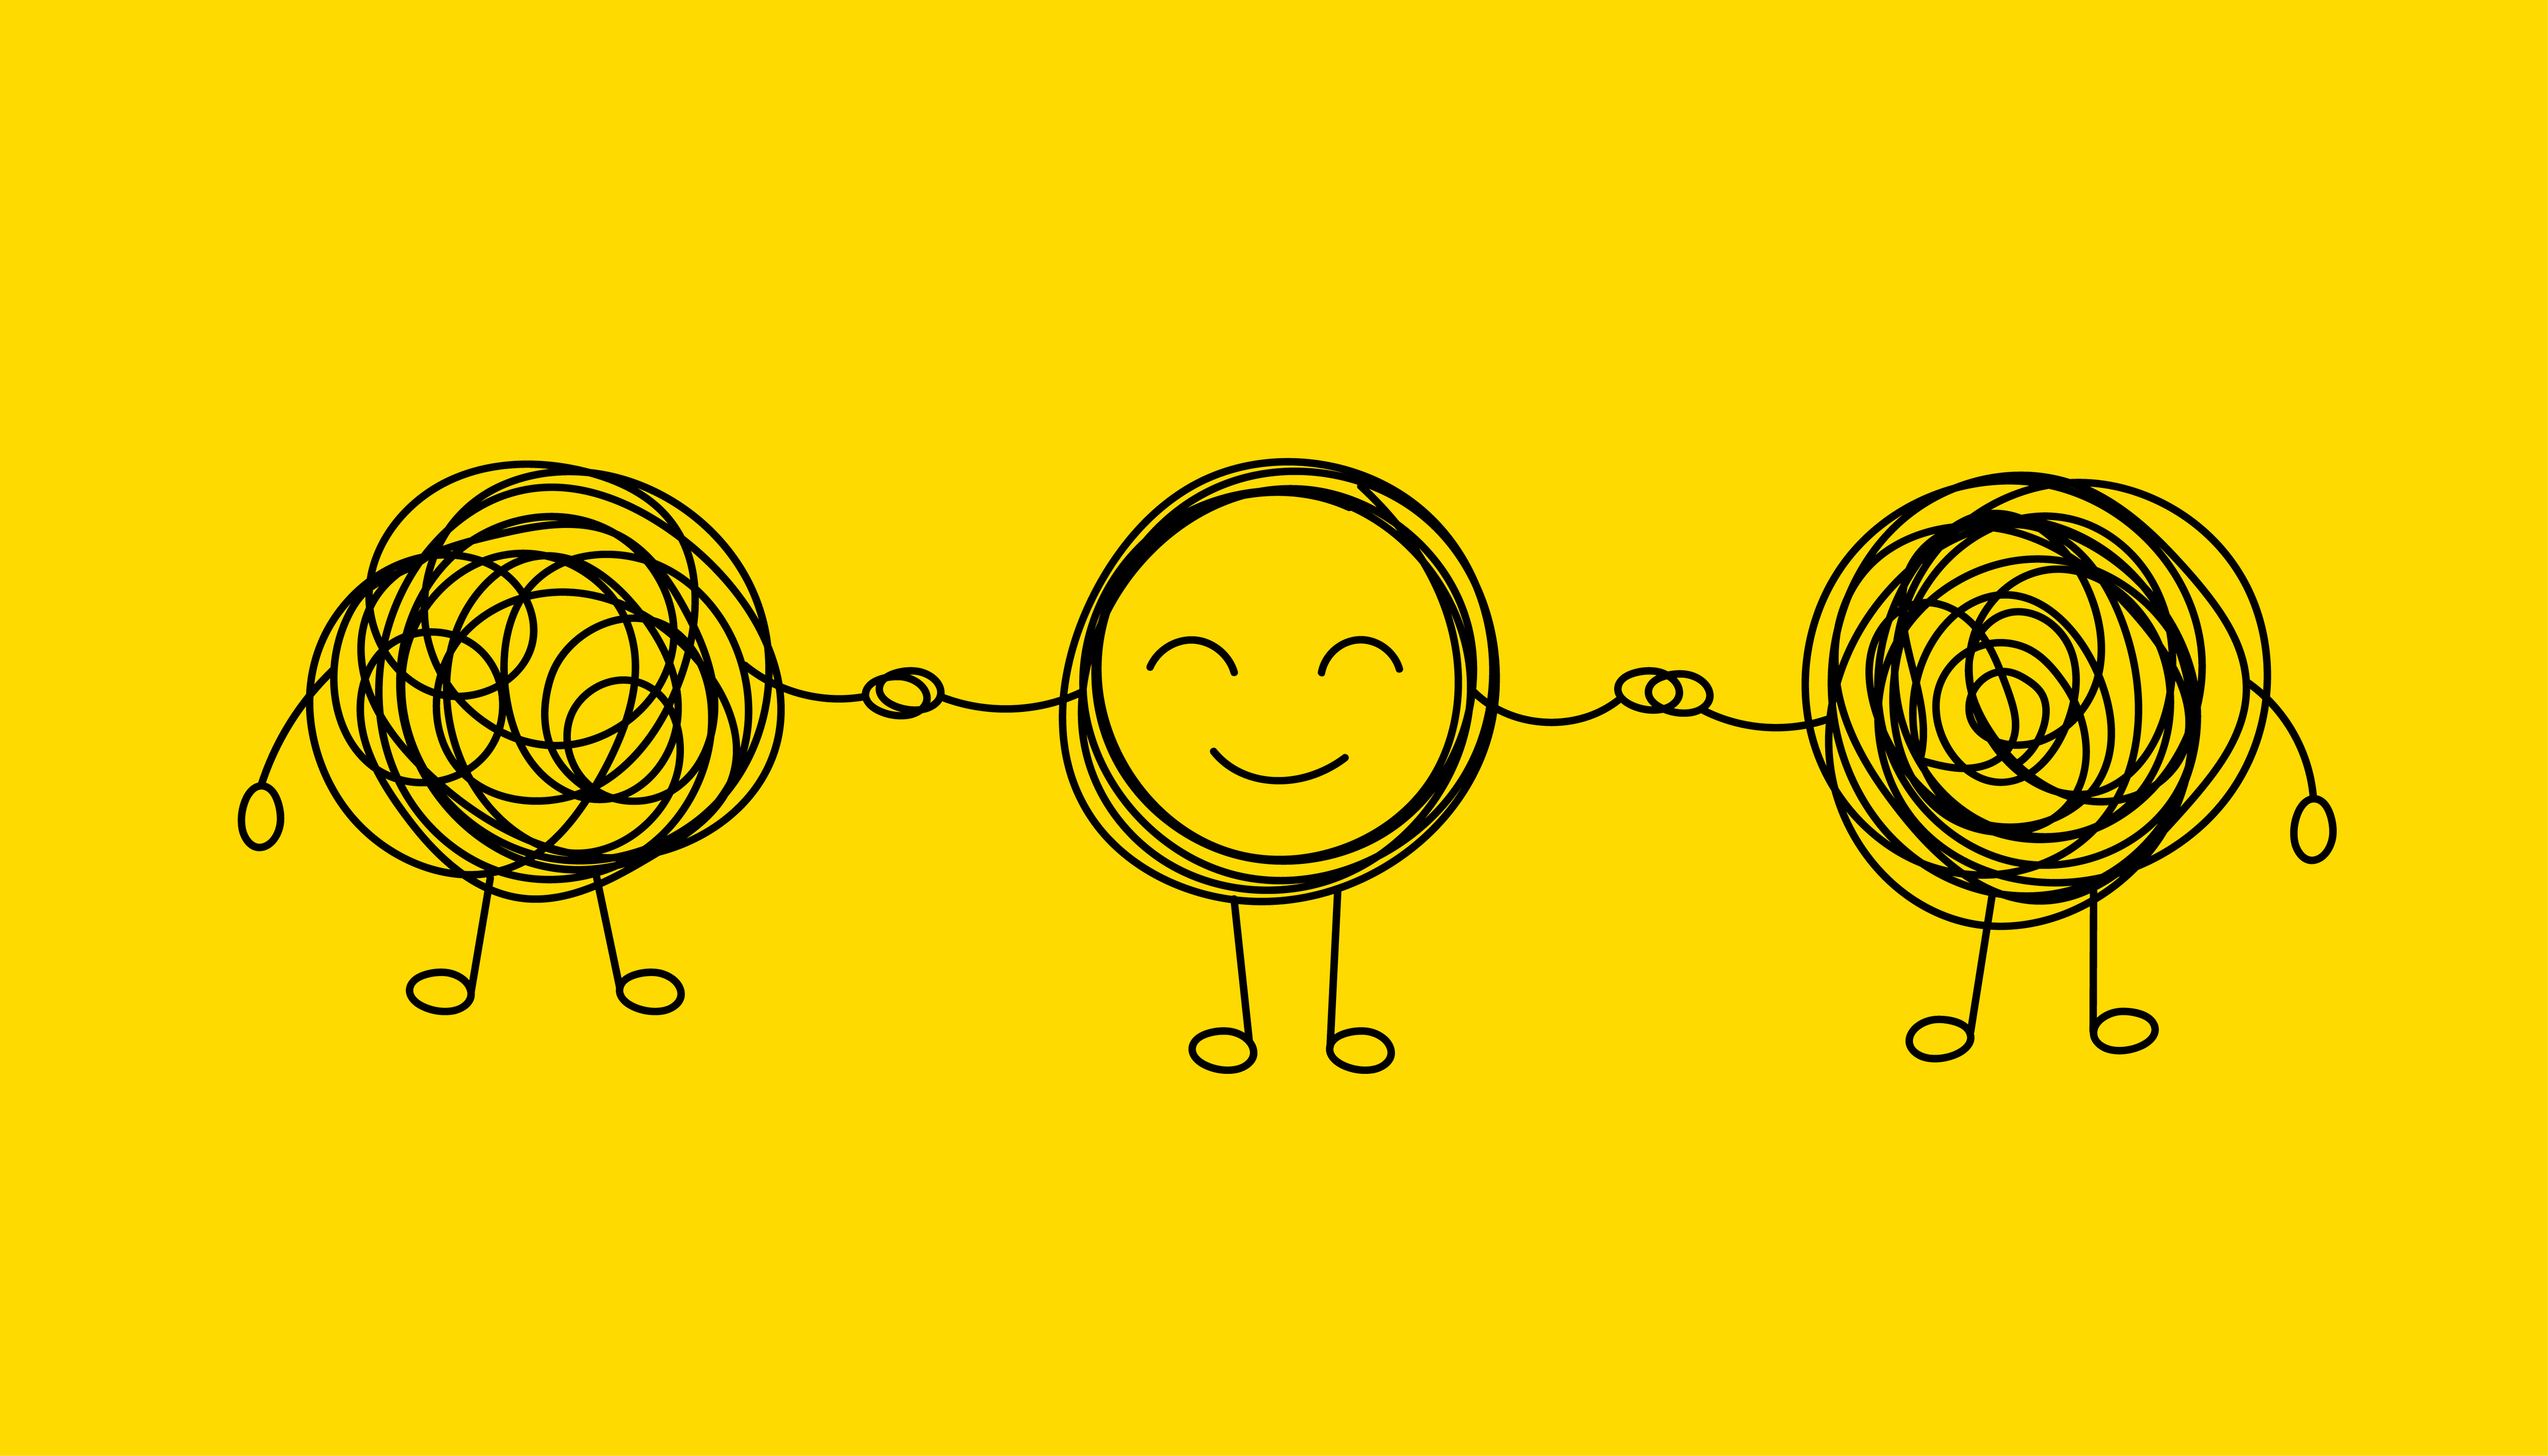 A minimalist drawing of a smiling stick figure with arms extended, connecting two scribbled balls, against a yellow background.